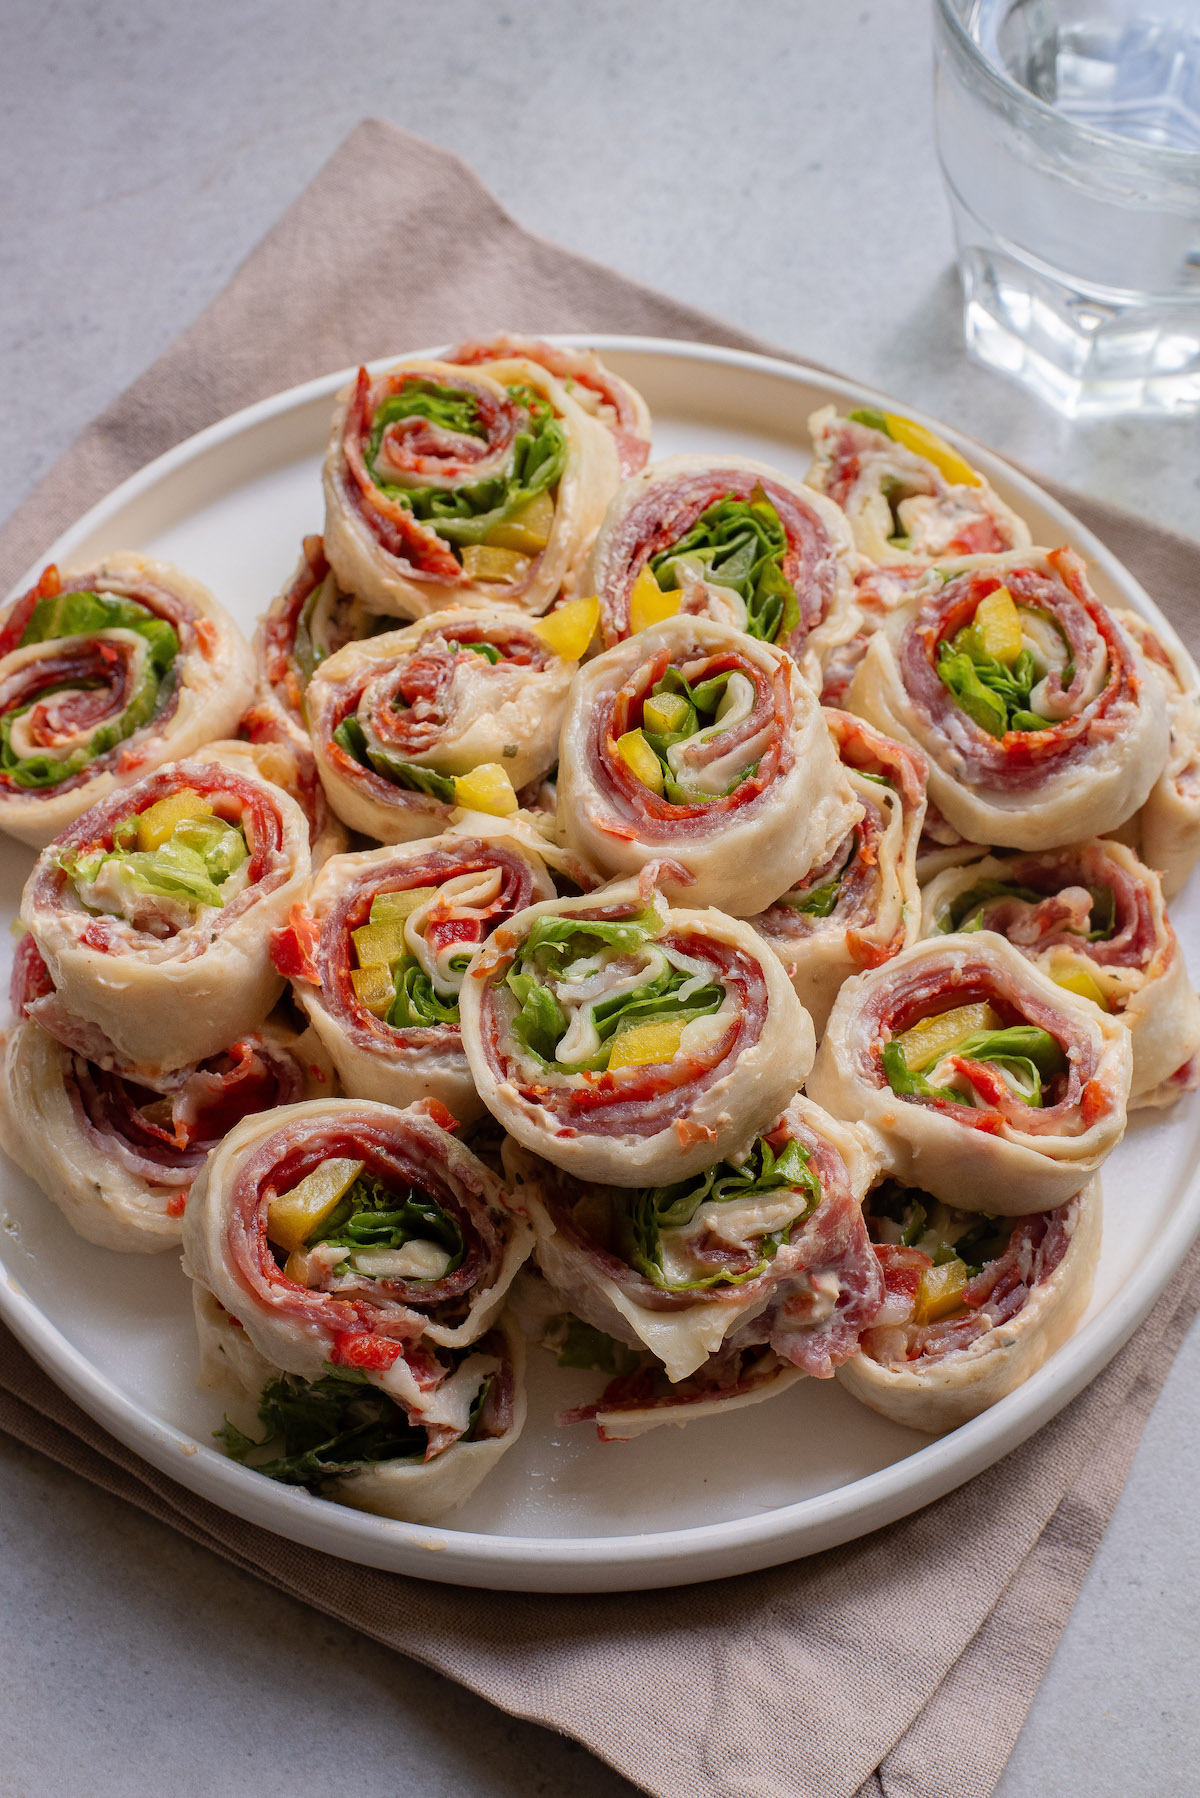 a platter filled with the completed pinwheel sandwiches